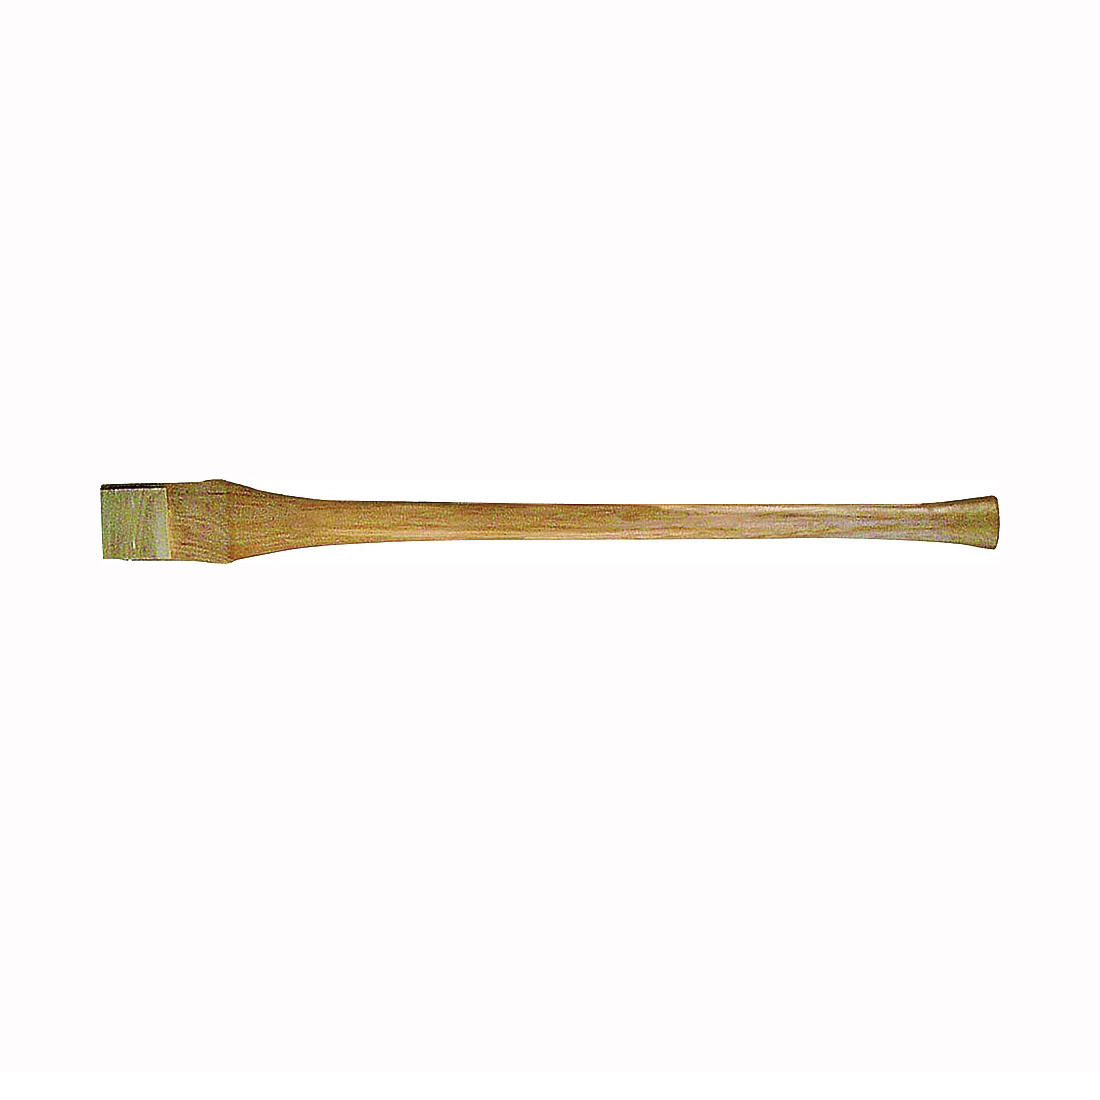 64745 Axe Handle, American Hickory Wood, Natural, Lacquered, For: 3 to 5 lb Axes